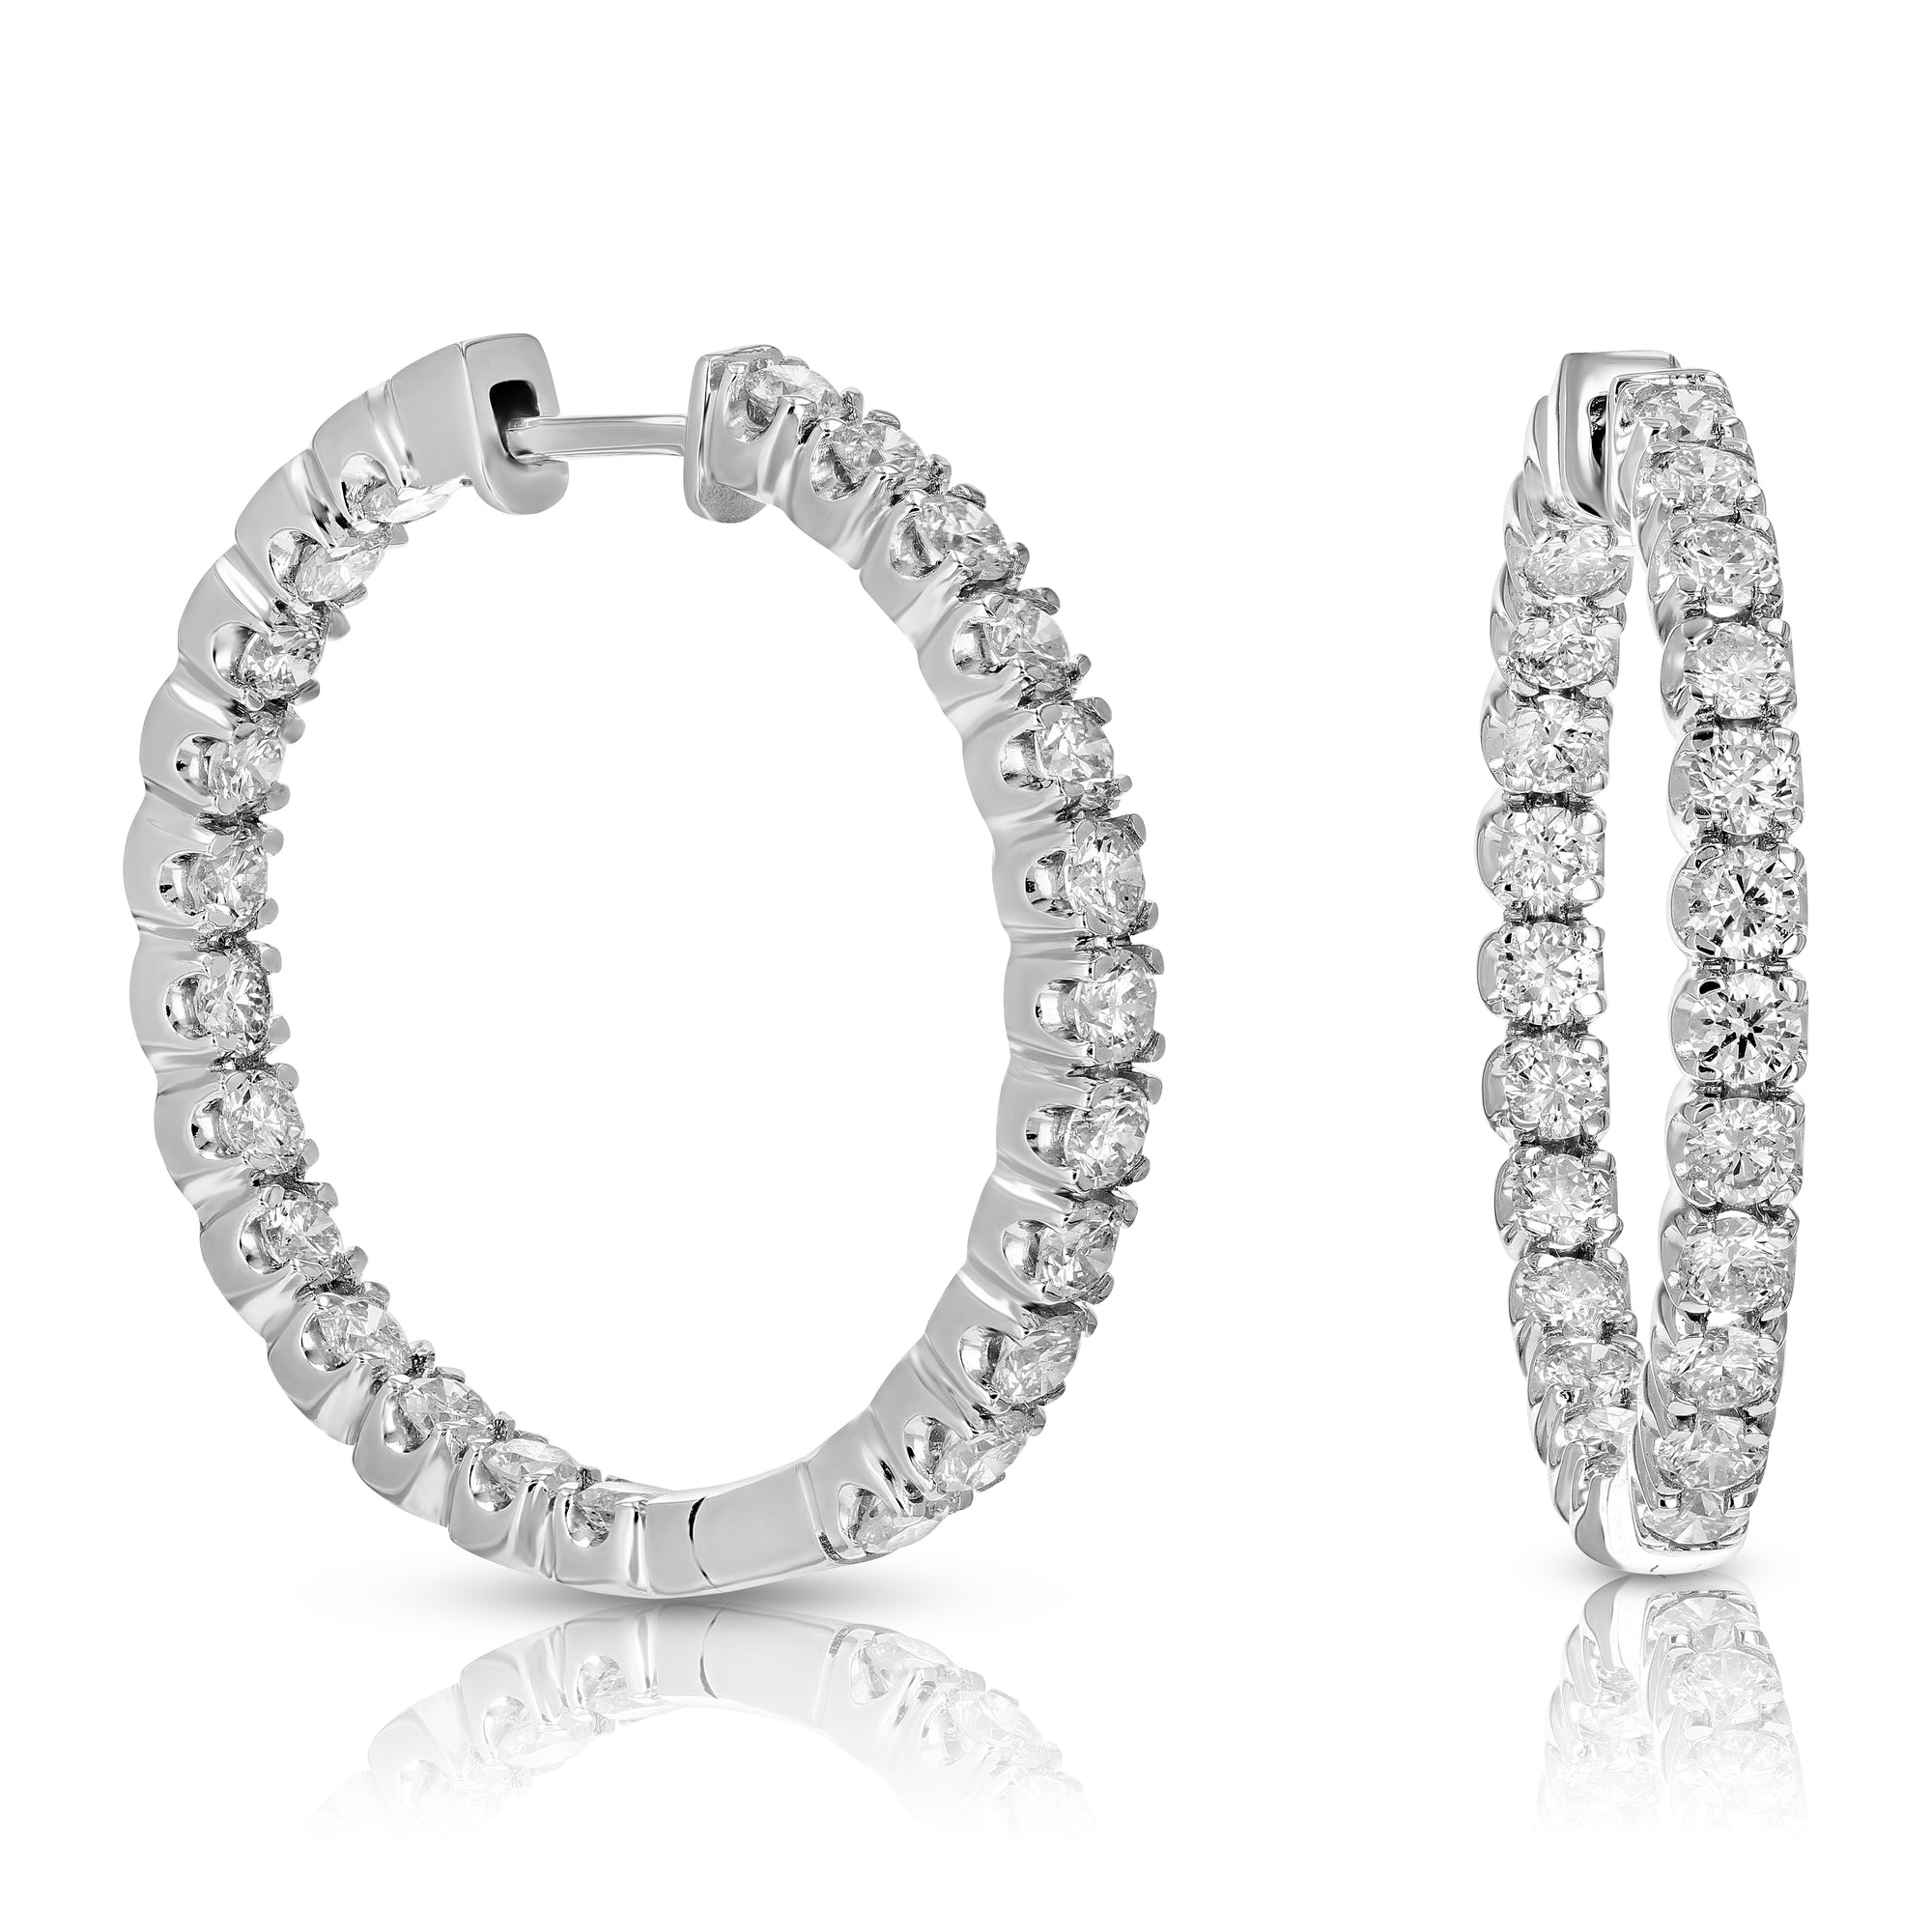 4 cttw SI2-I1 Certified Diamond Hoop Earrings 14K White Gold Round 1.30 inch